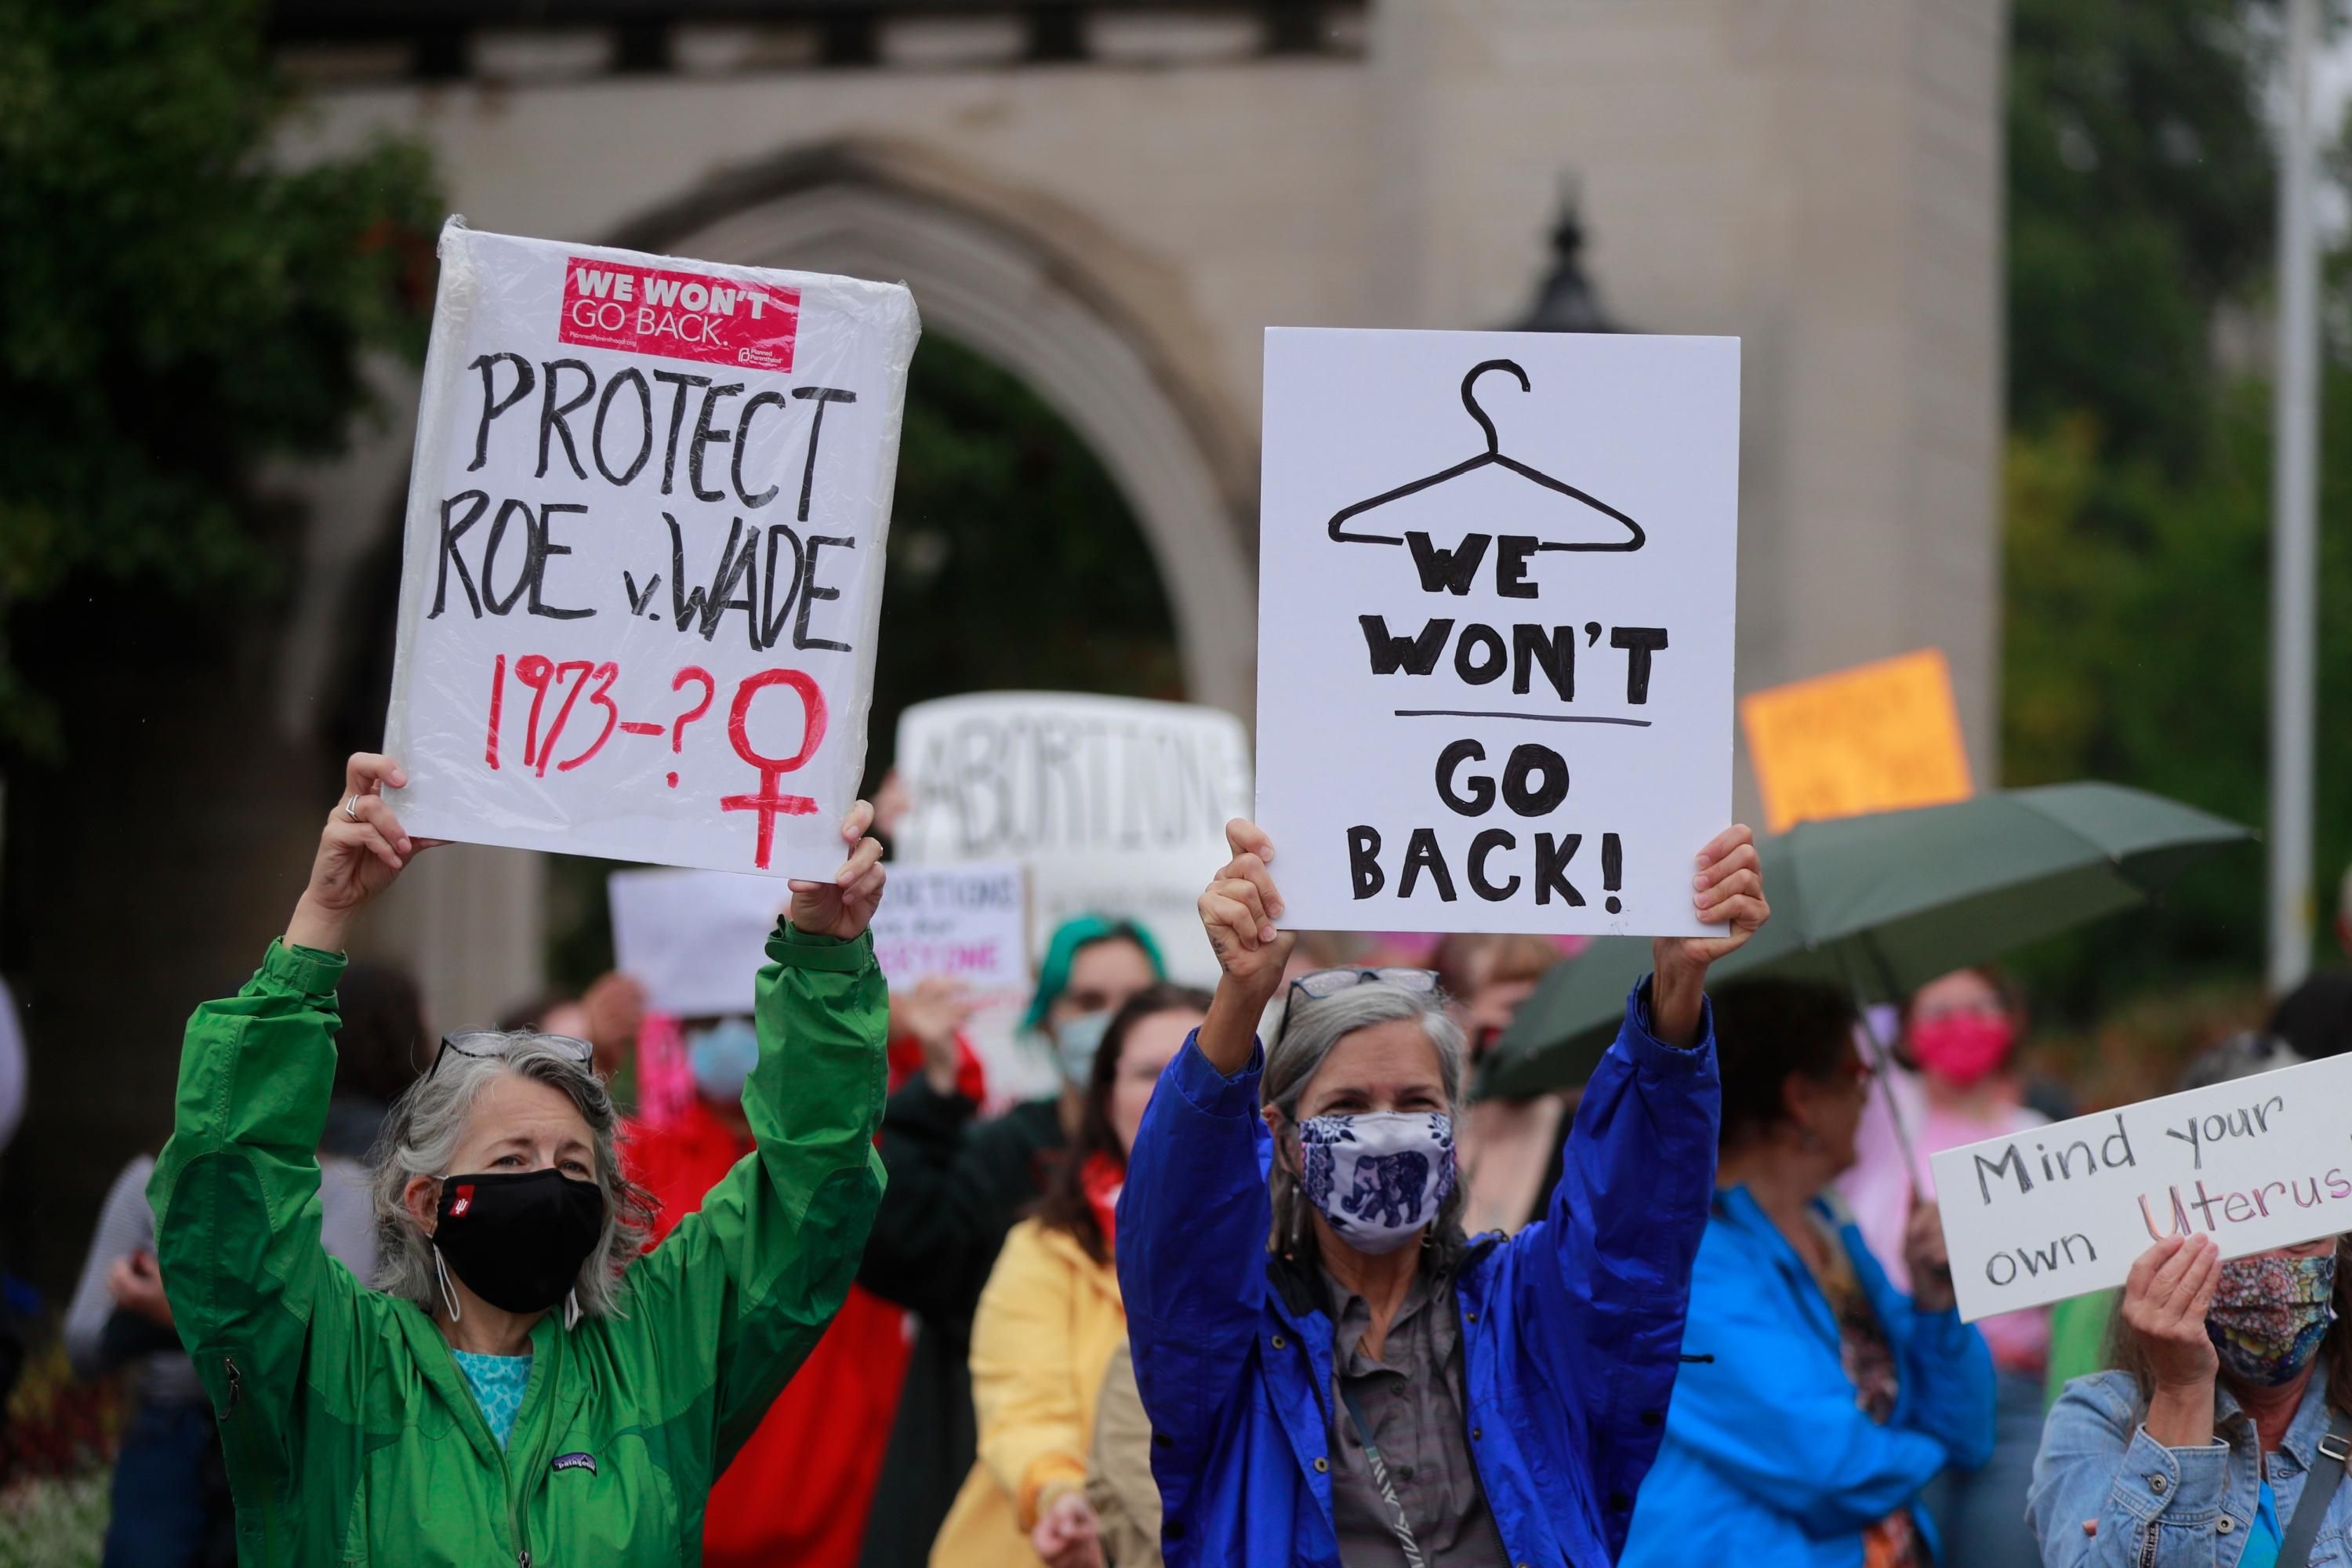 pro-Roe signs